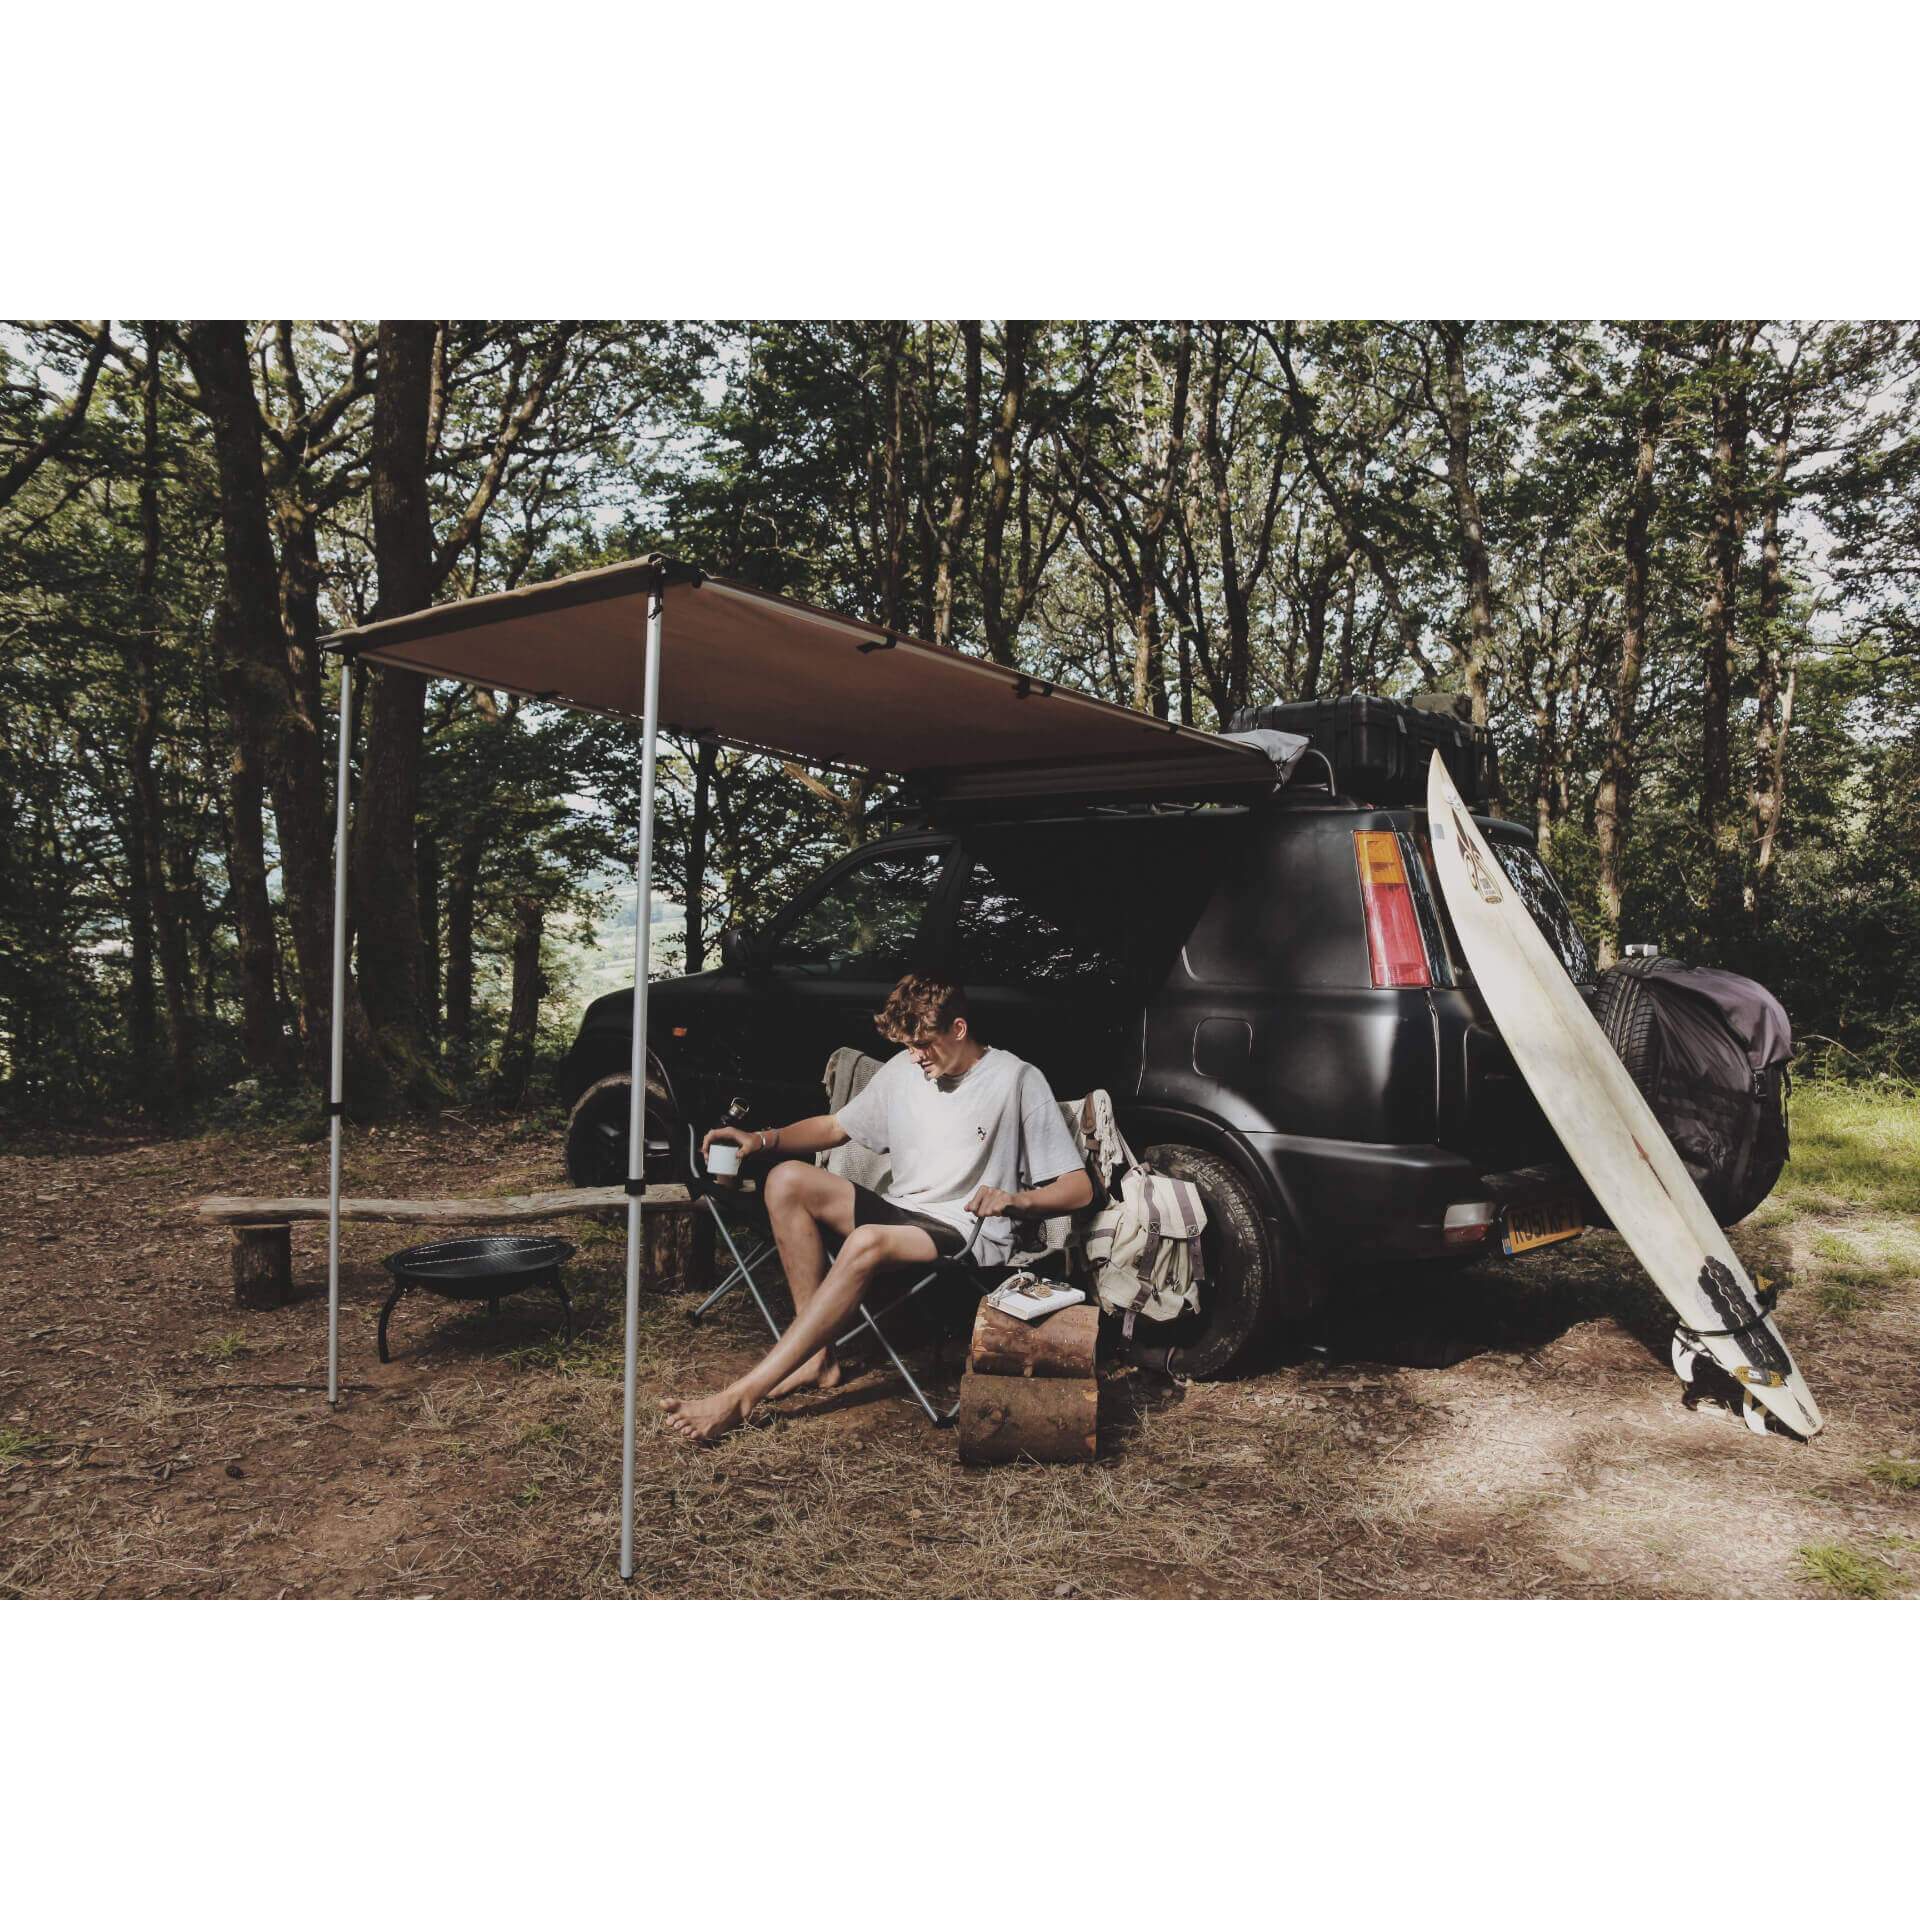 [CLEARANCE] - Expedition Pull-out 2.5mx2.5m Granite Grey Vehicle Side Awning -  - sold by Direct4x4